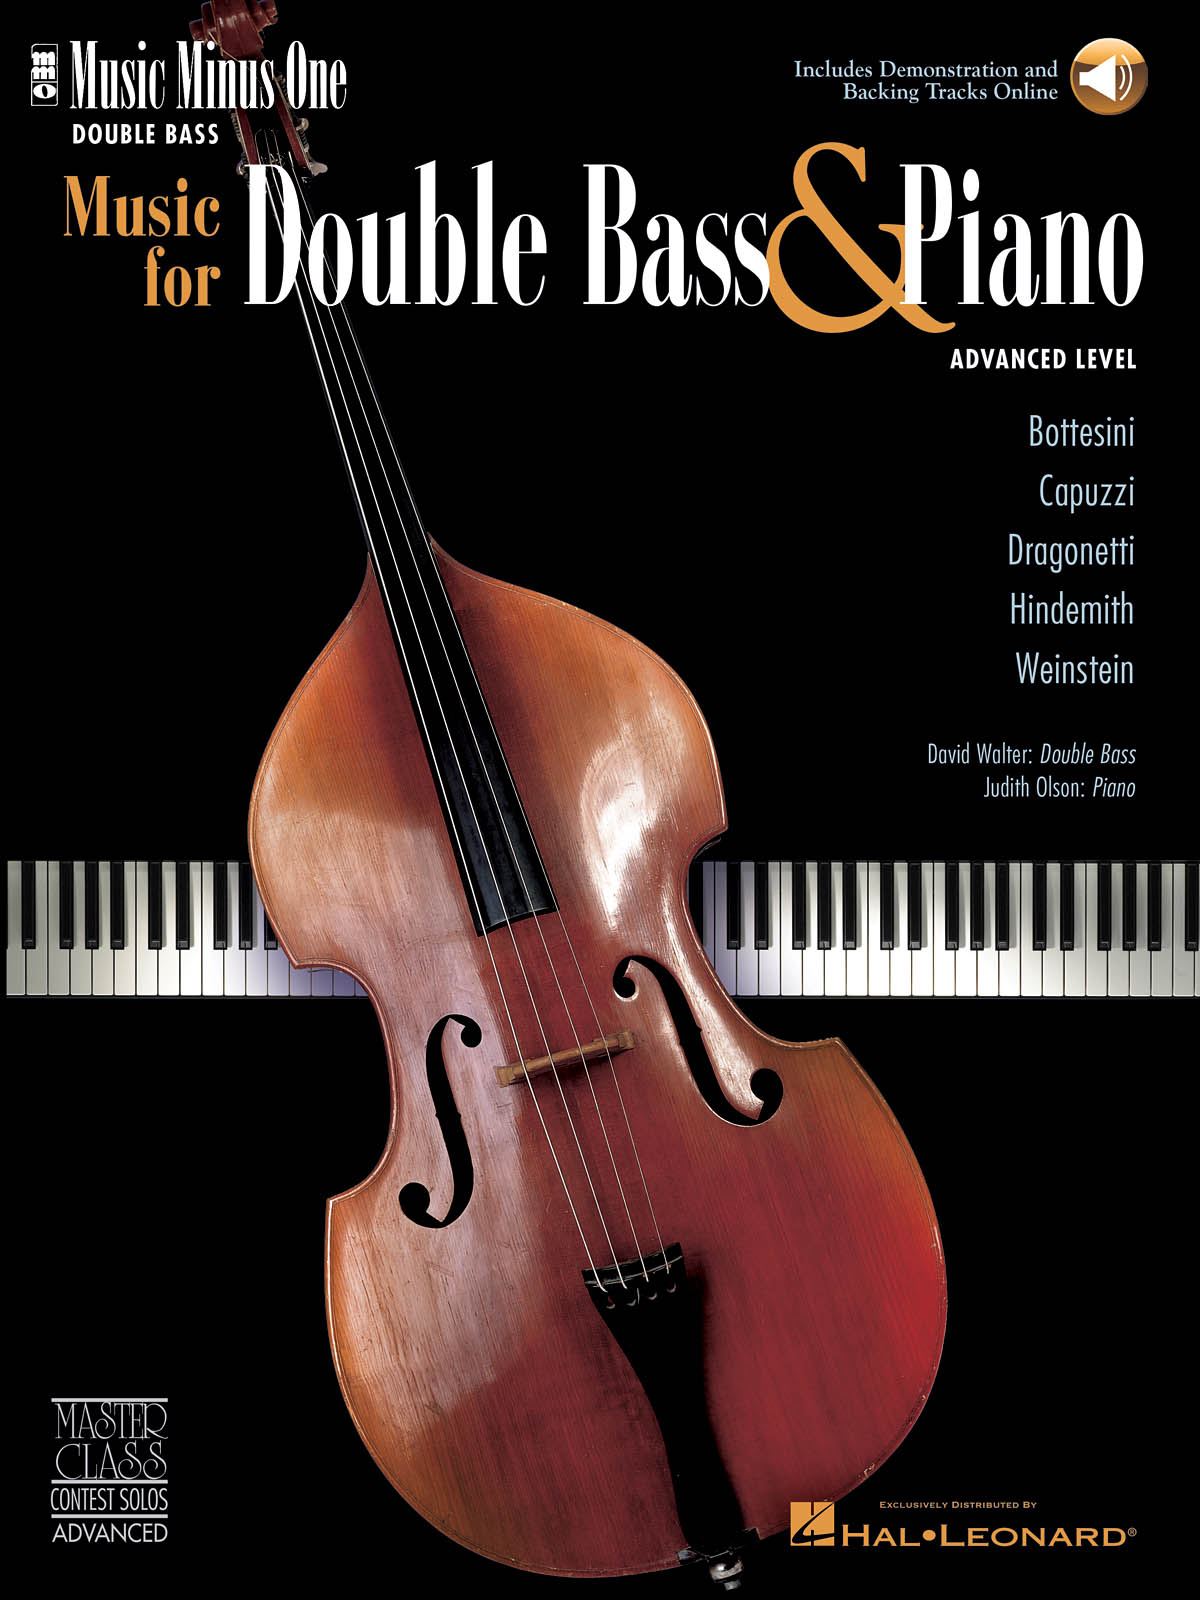 Music for Double Bass & Piano - Advanced Level: Double Bass Solo